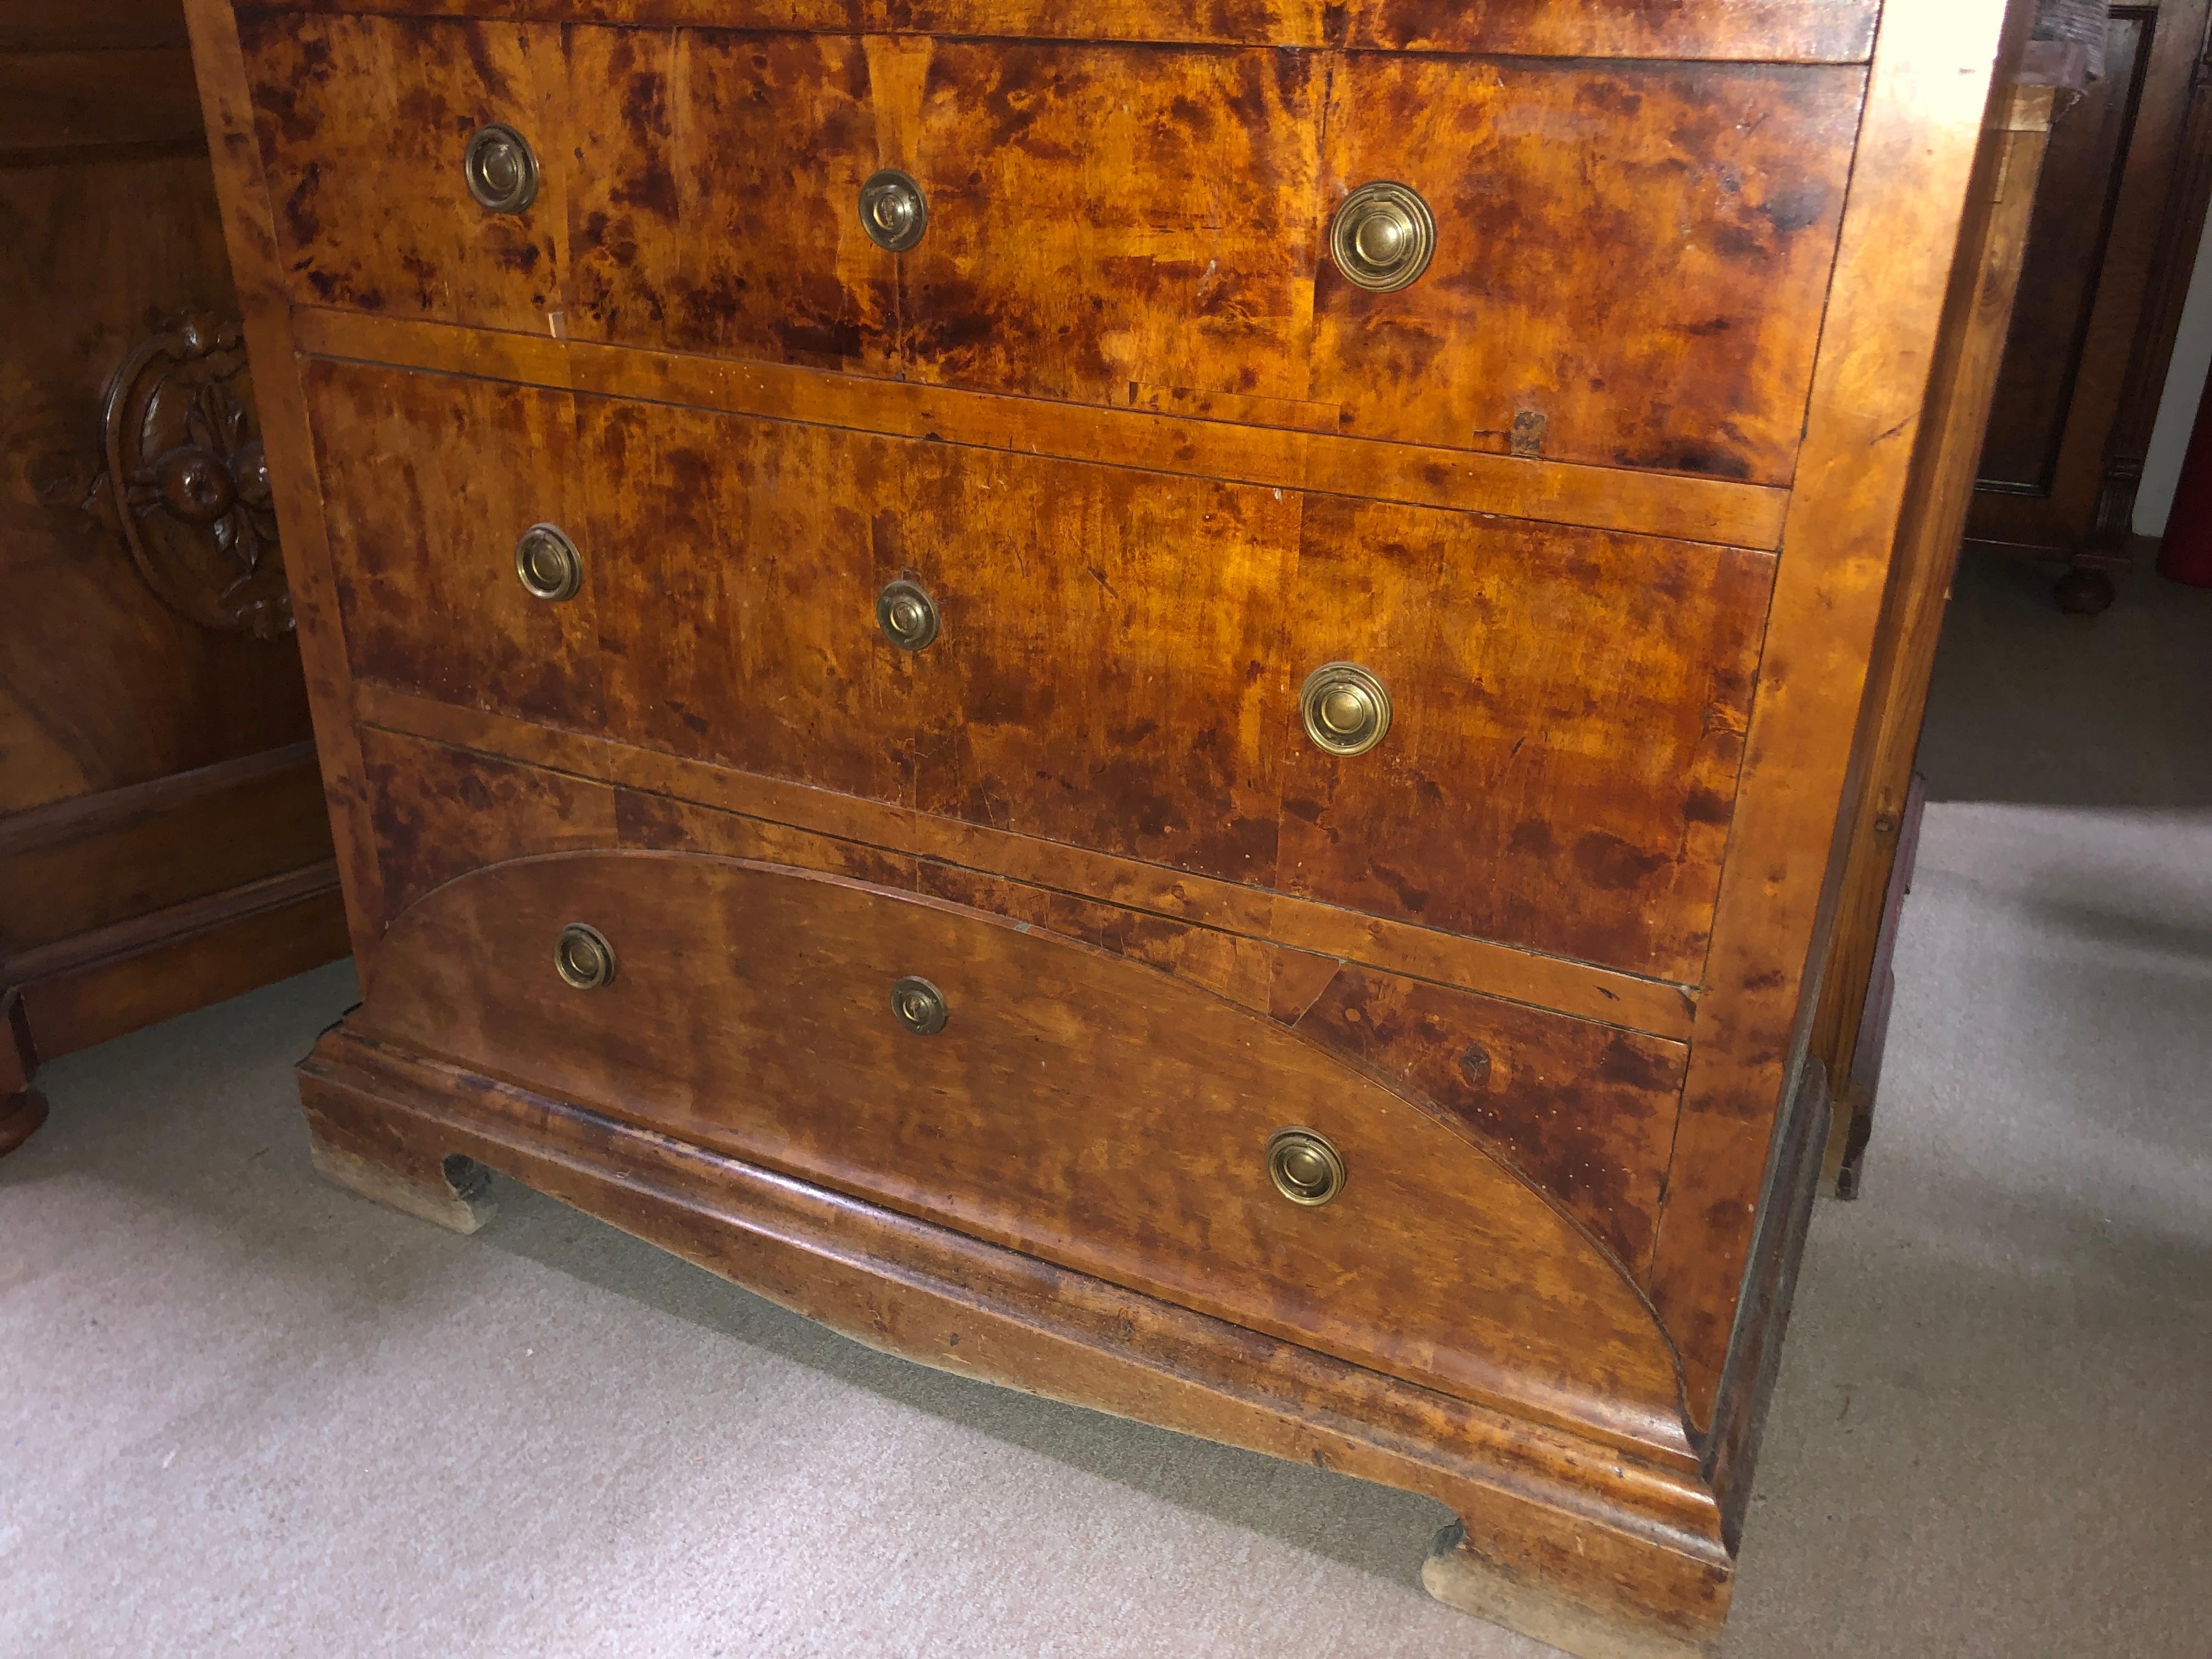 Beautiful example of Biedermeier chest of drawers from Sweden in birch wood. First Biedermeier period, circa 1830. Inside the secretaire there is the central part in the shape of a Greek temple, with ebonized profiles. We also find secrets and a